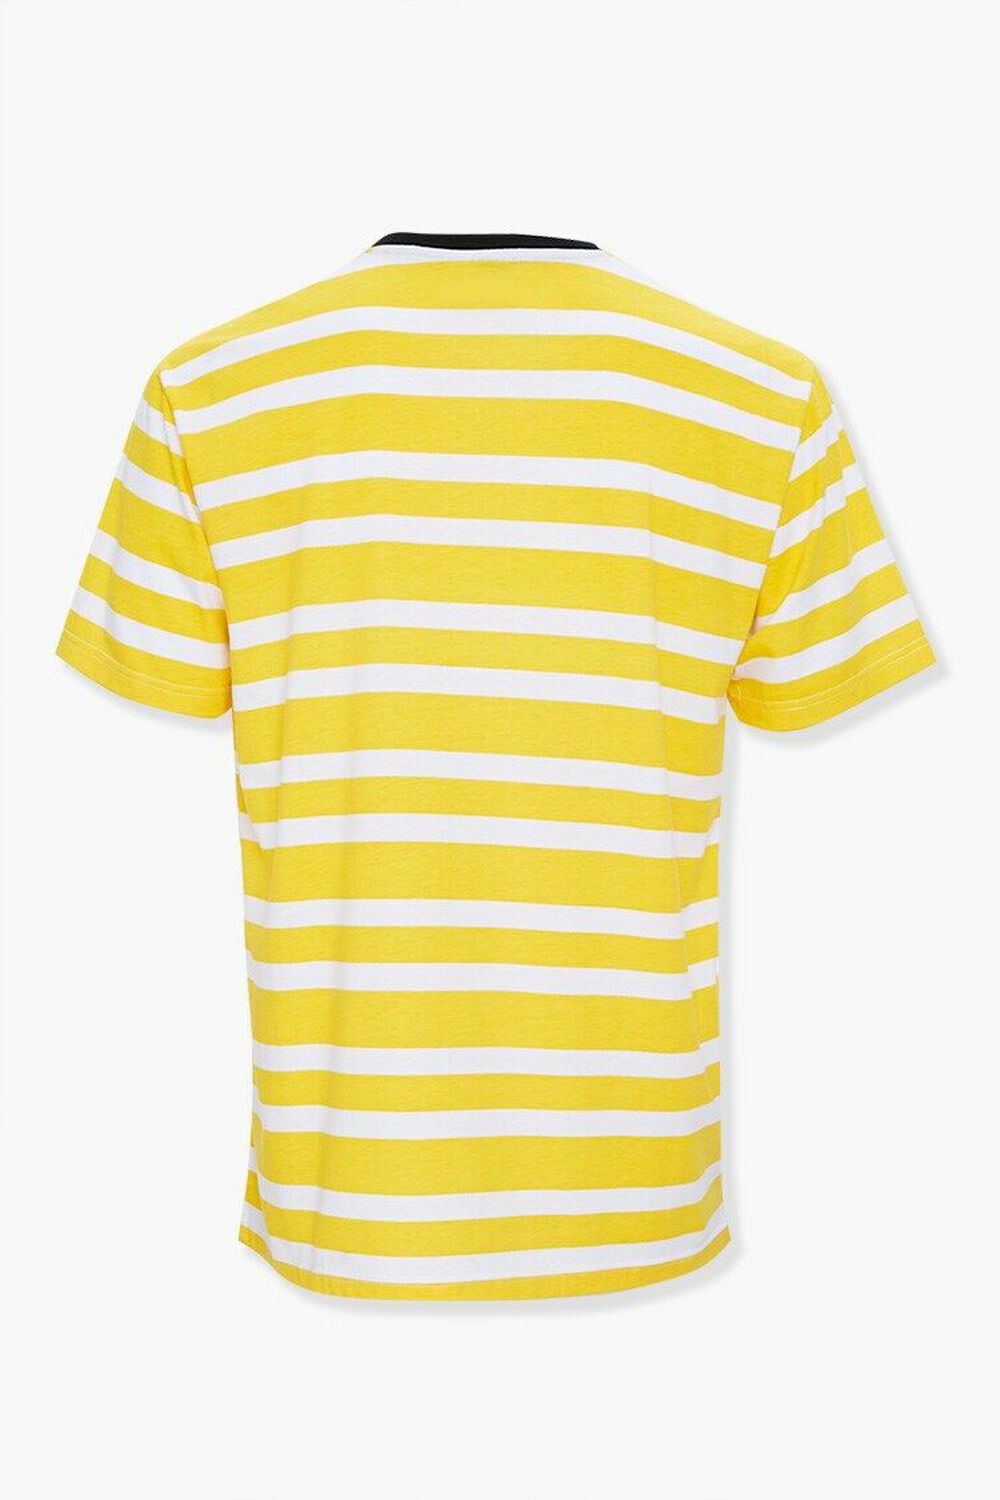 Striped Paradise Graphic Tee, image 2